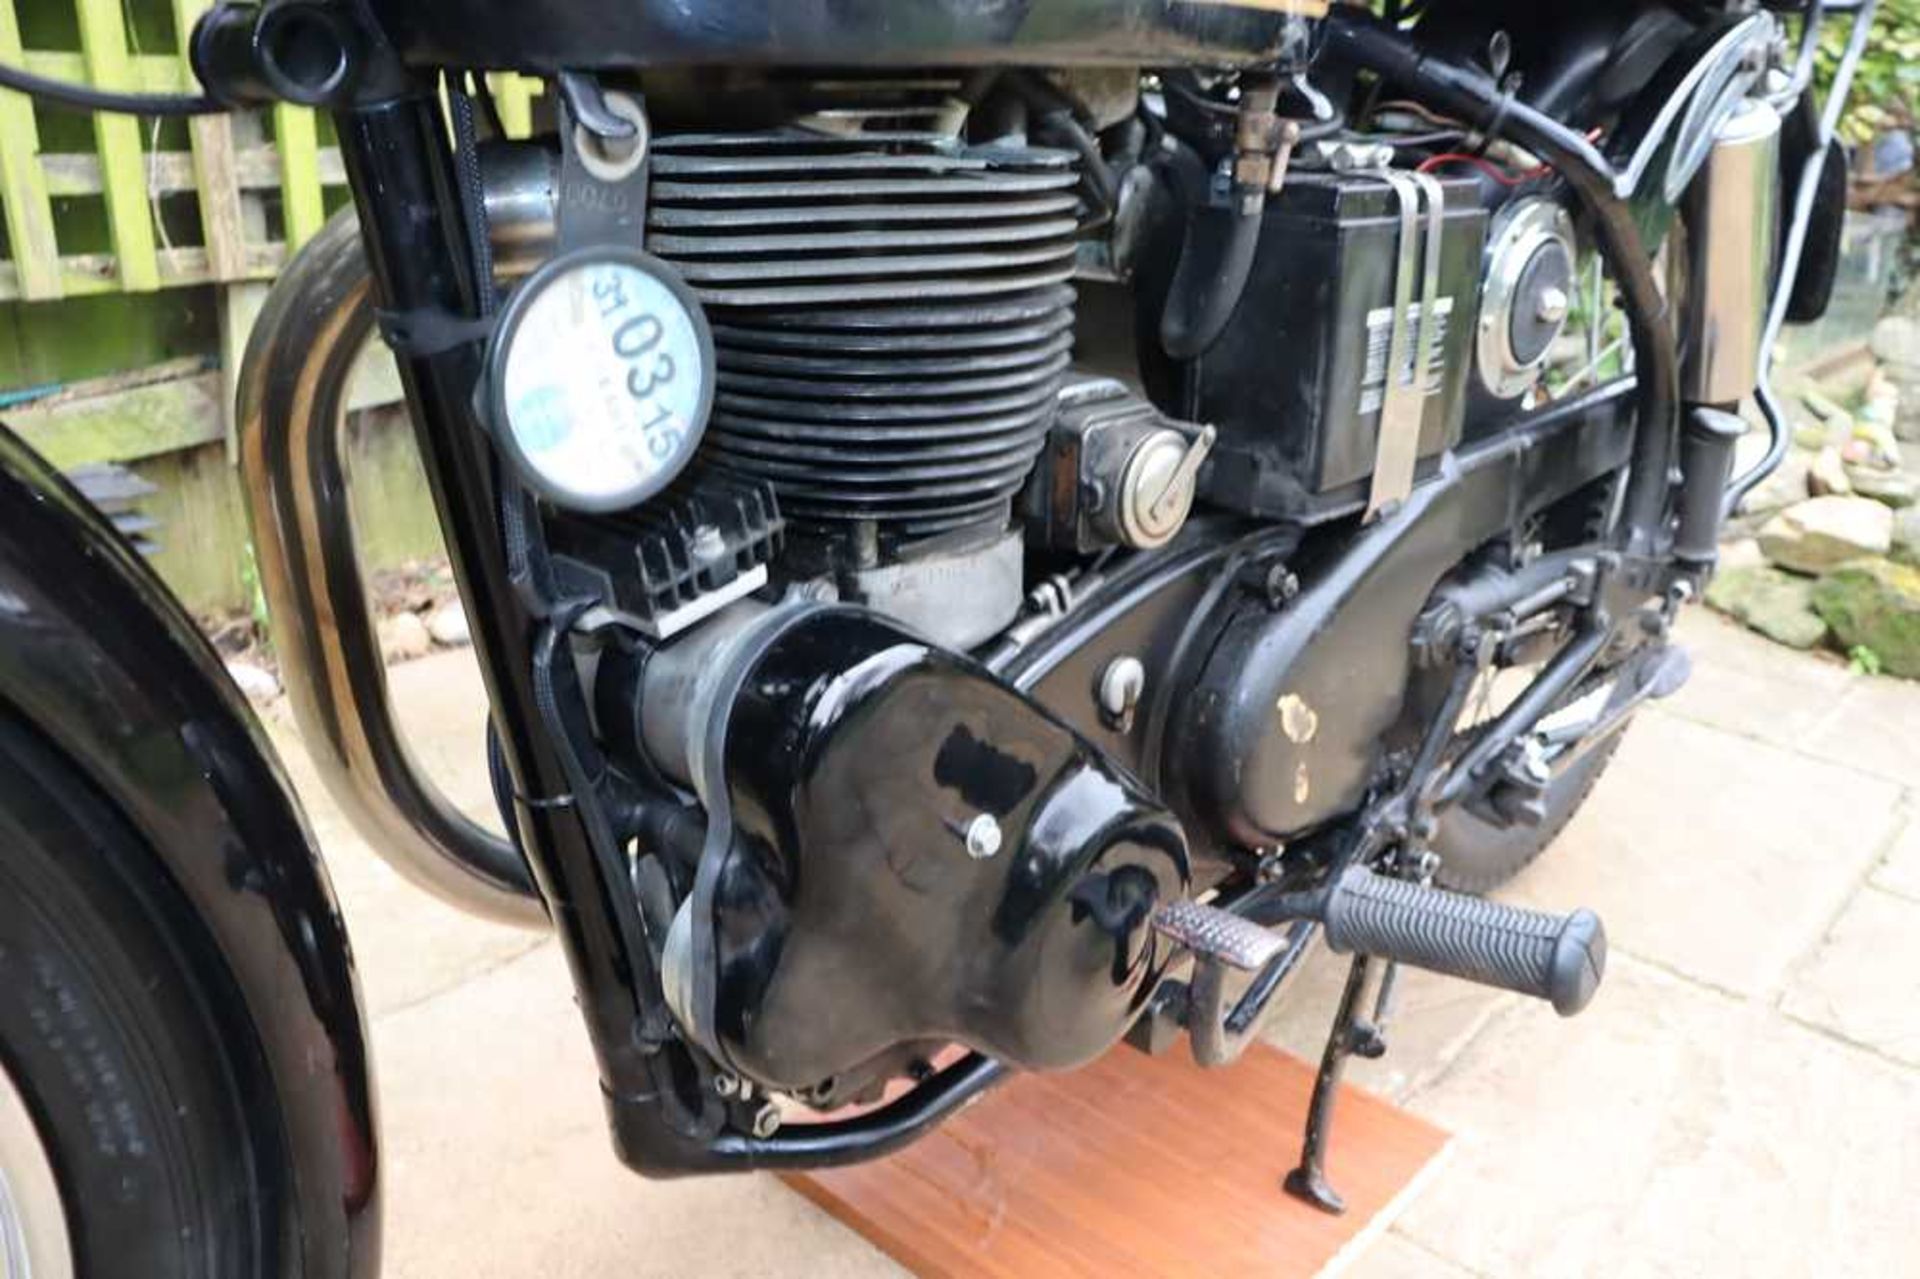 1954 Velocette MSS Fitted with an Alton electric starter kit - Image 28 of 41